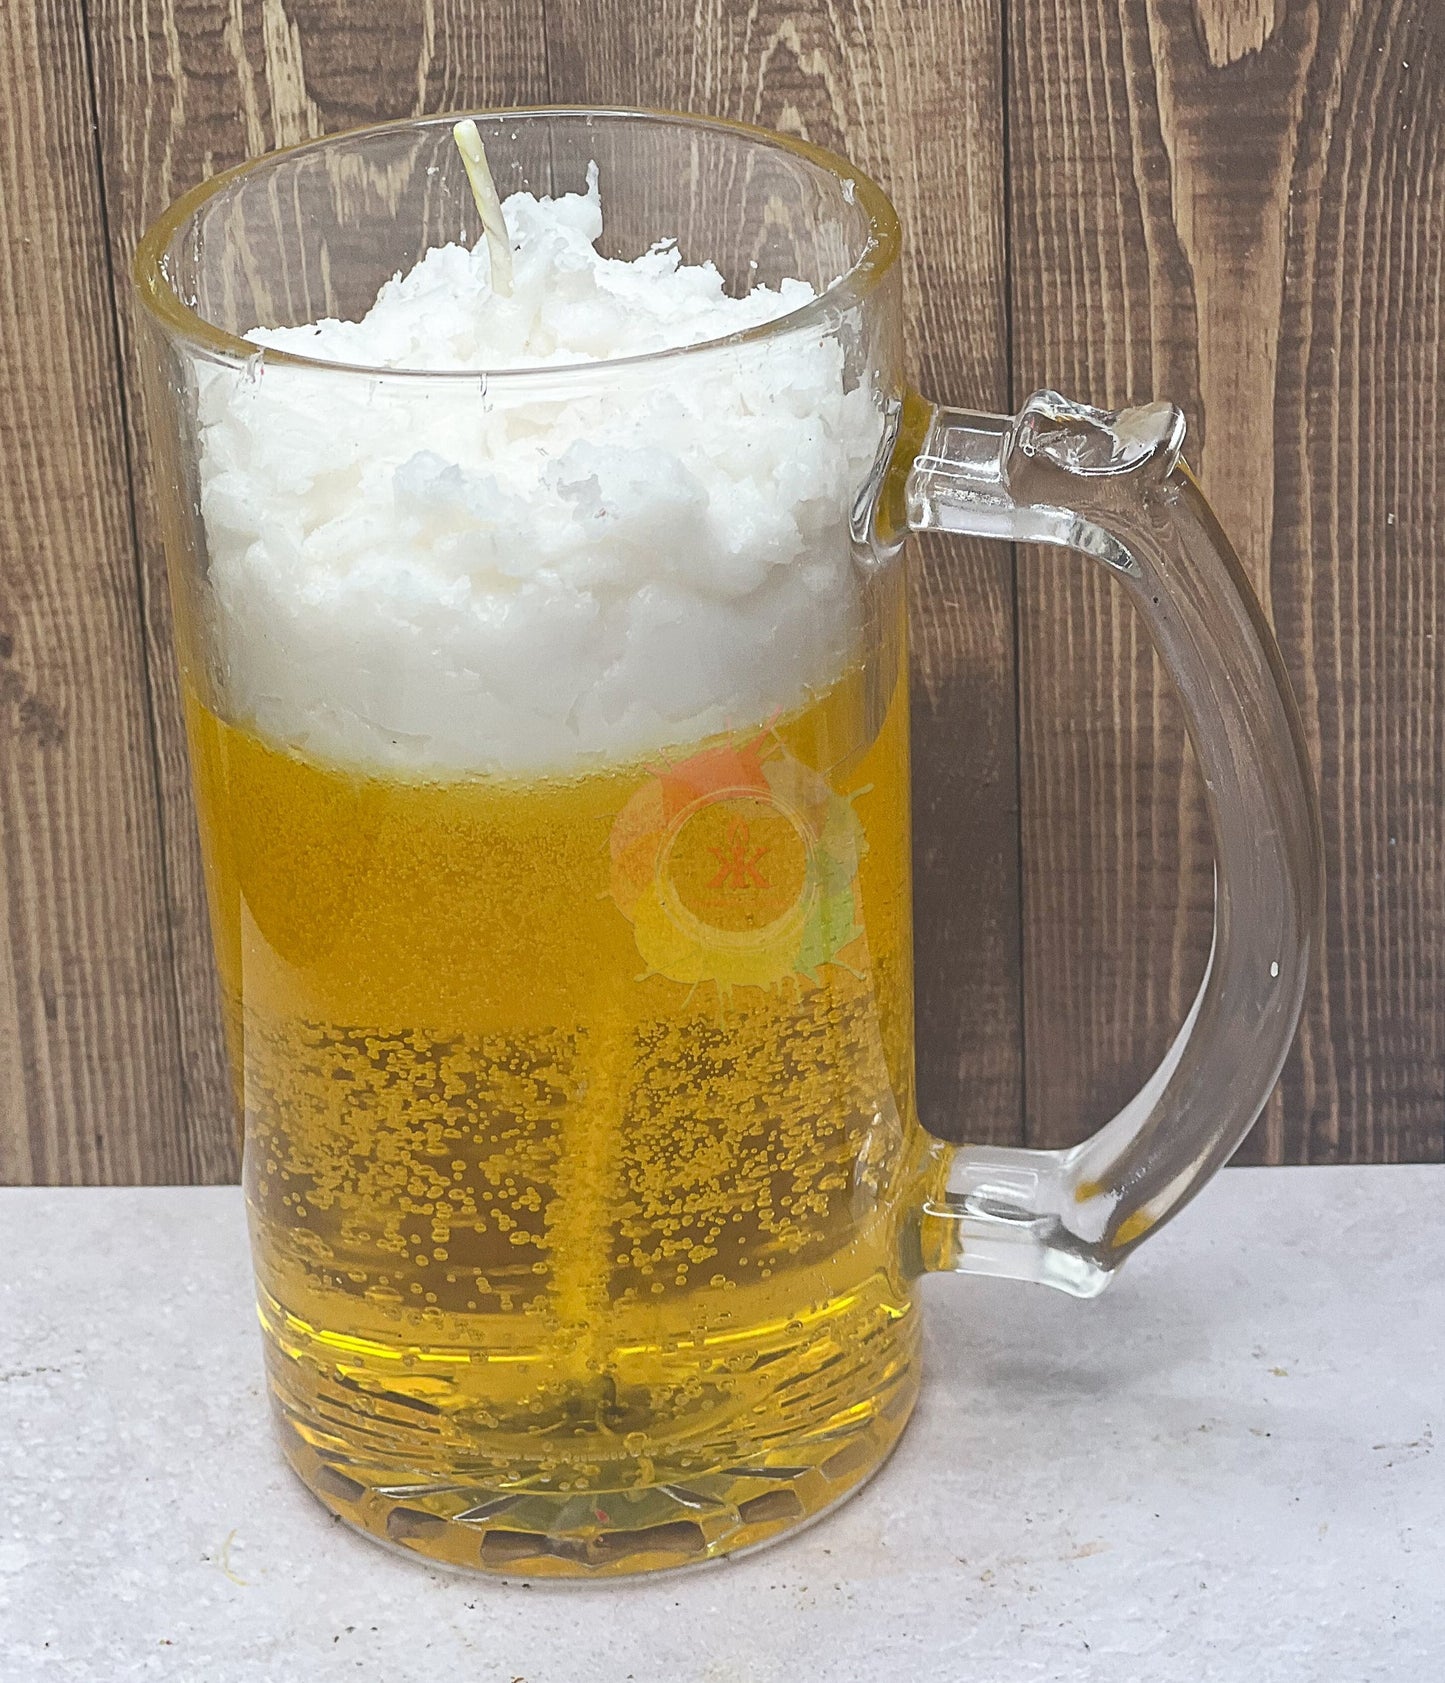 Candle in mug glass jar. Candle made to look like beer with foam on top.